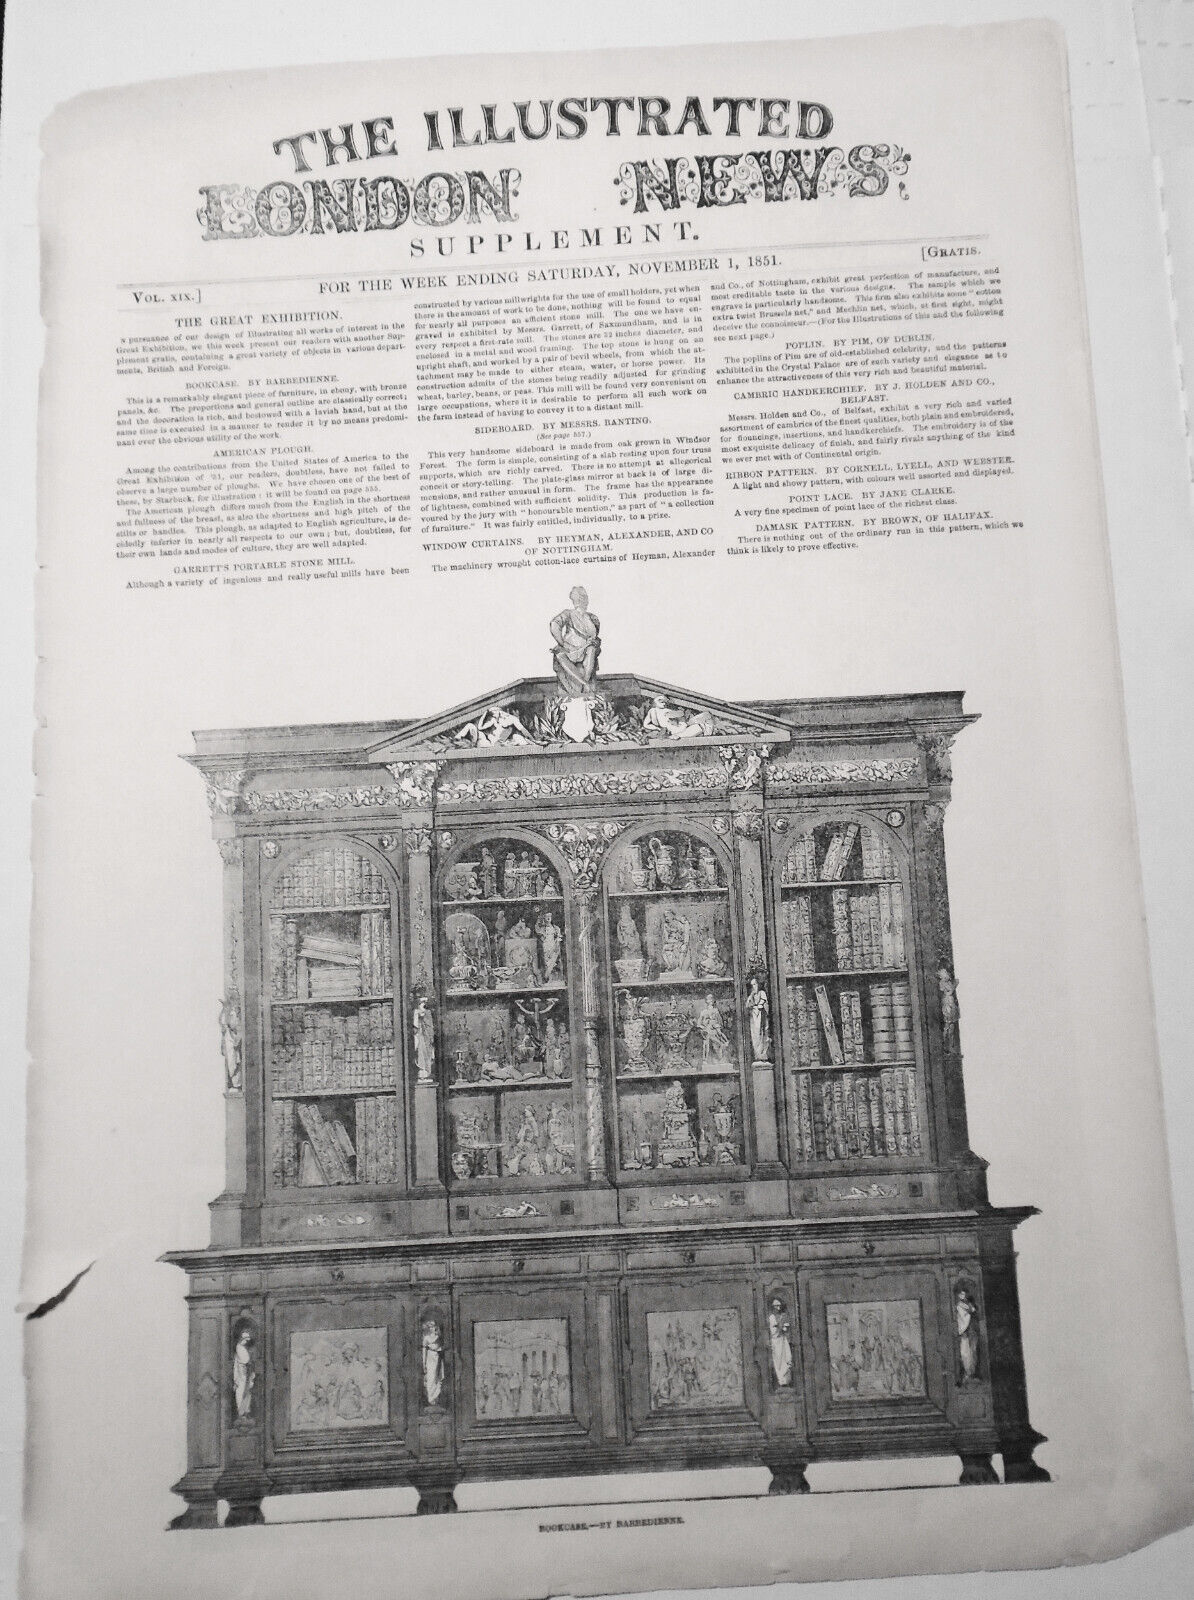 1851 The Great Exhibition - Supplement To The Illustrated London News - 6 pages